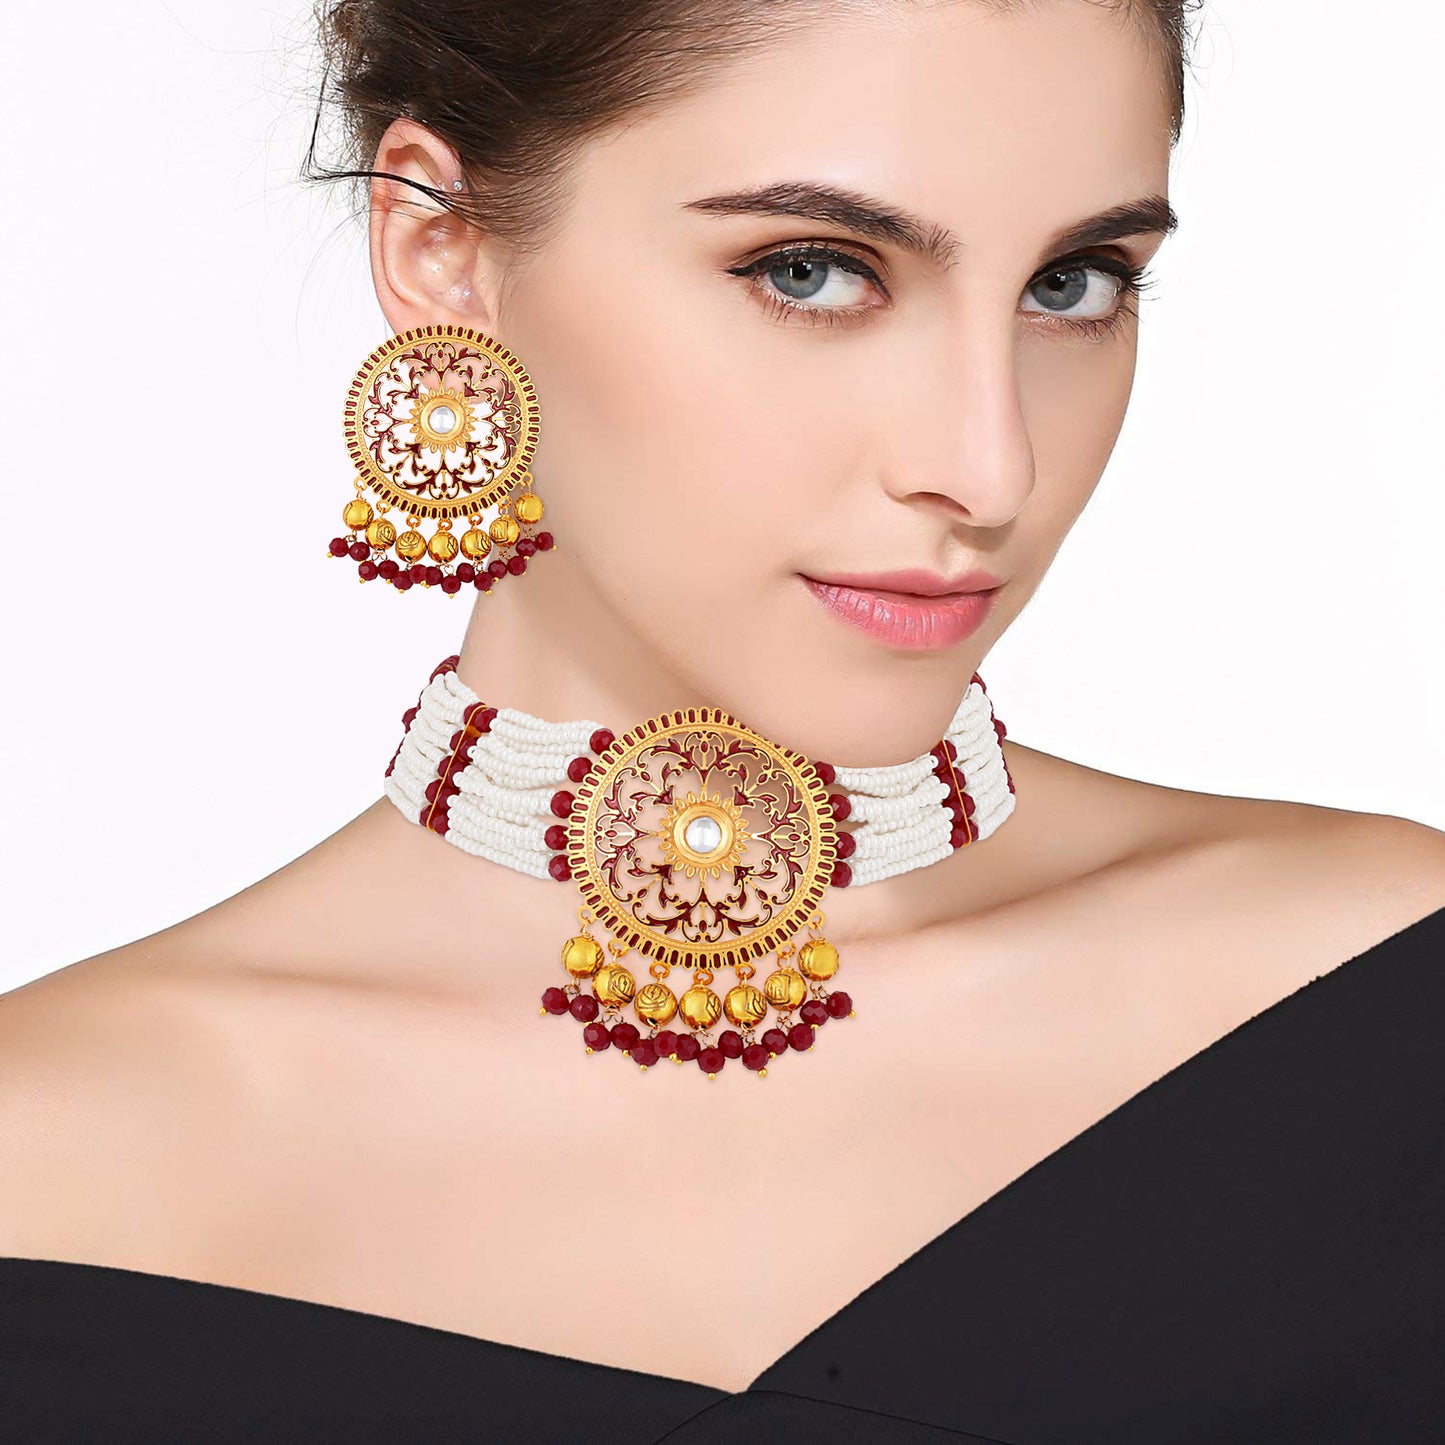 Bdiva 18K Gold Plated Intricately Carved Red Beads Round Choker Necklace.